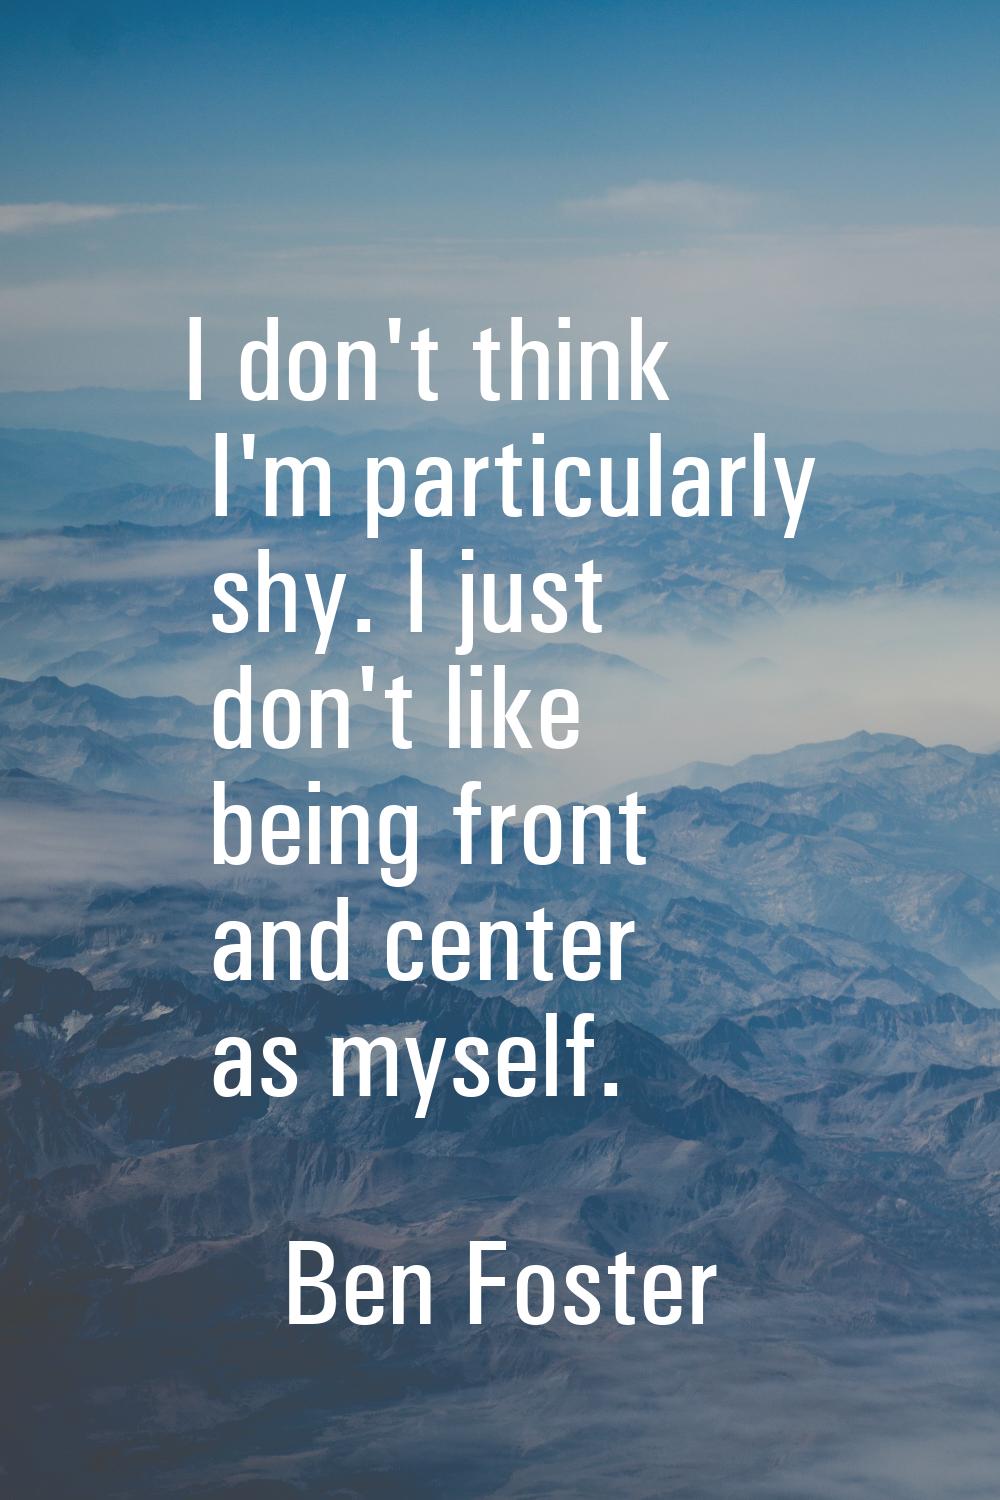 I don't think I'm particularly shy. I just don't like being front and center as myself.